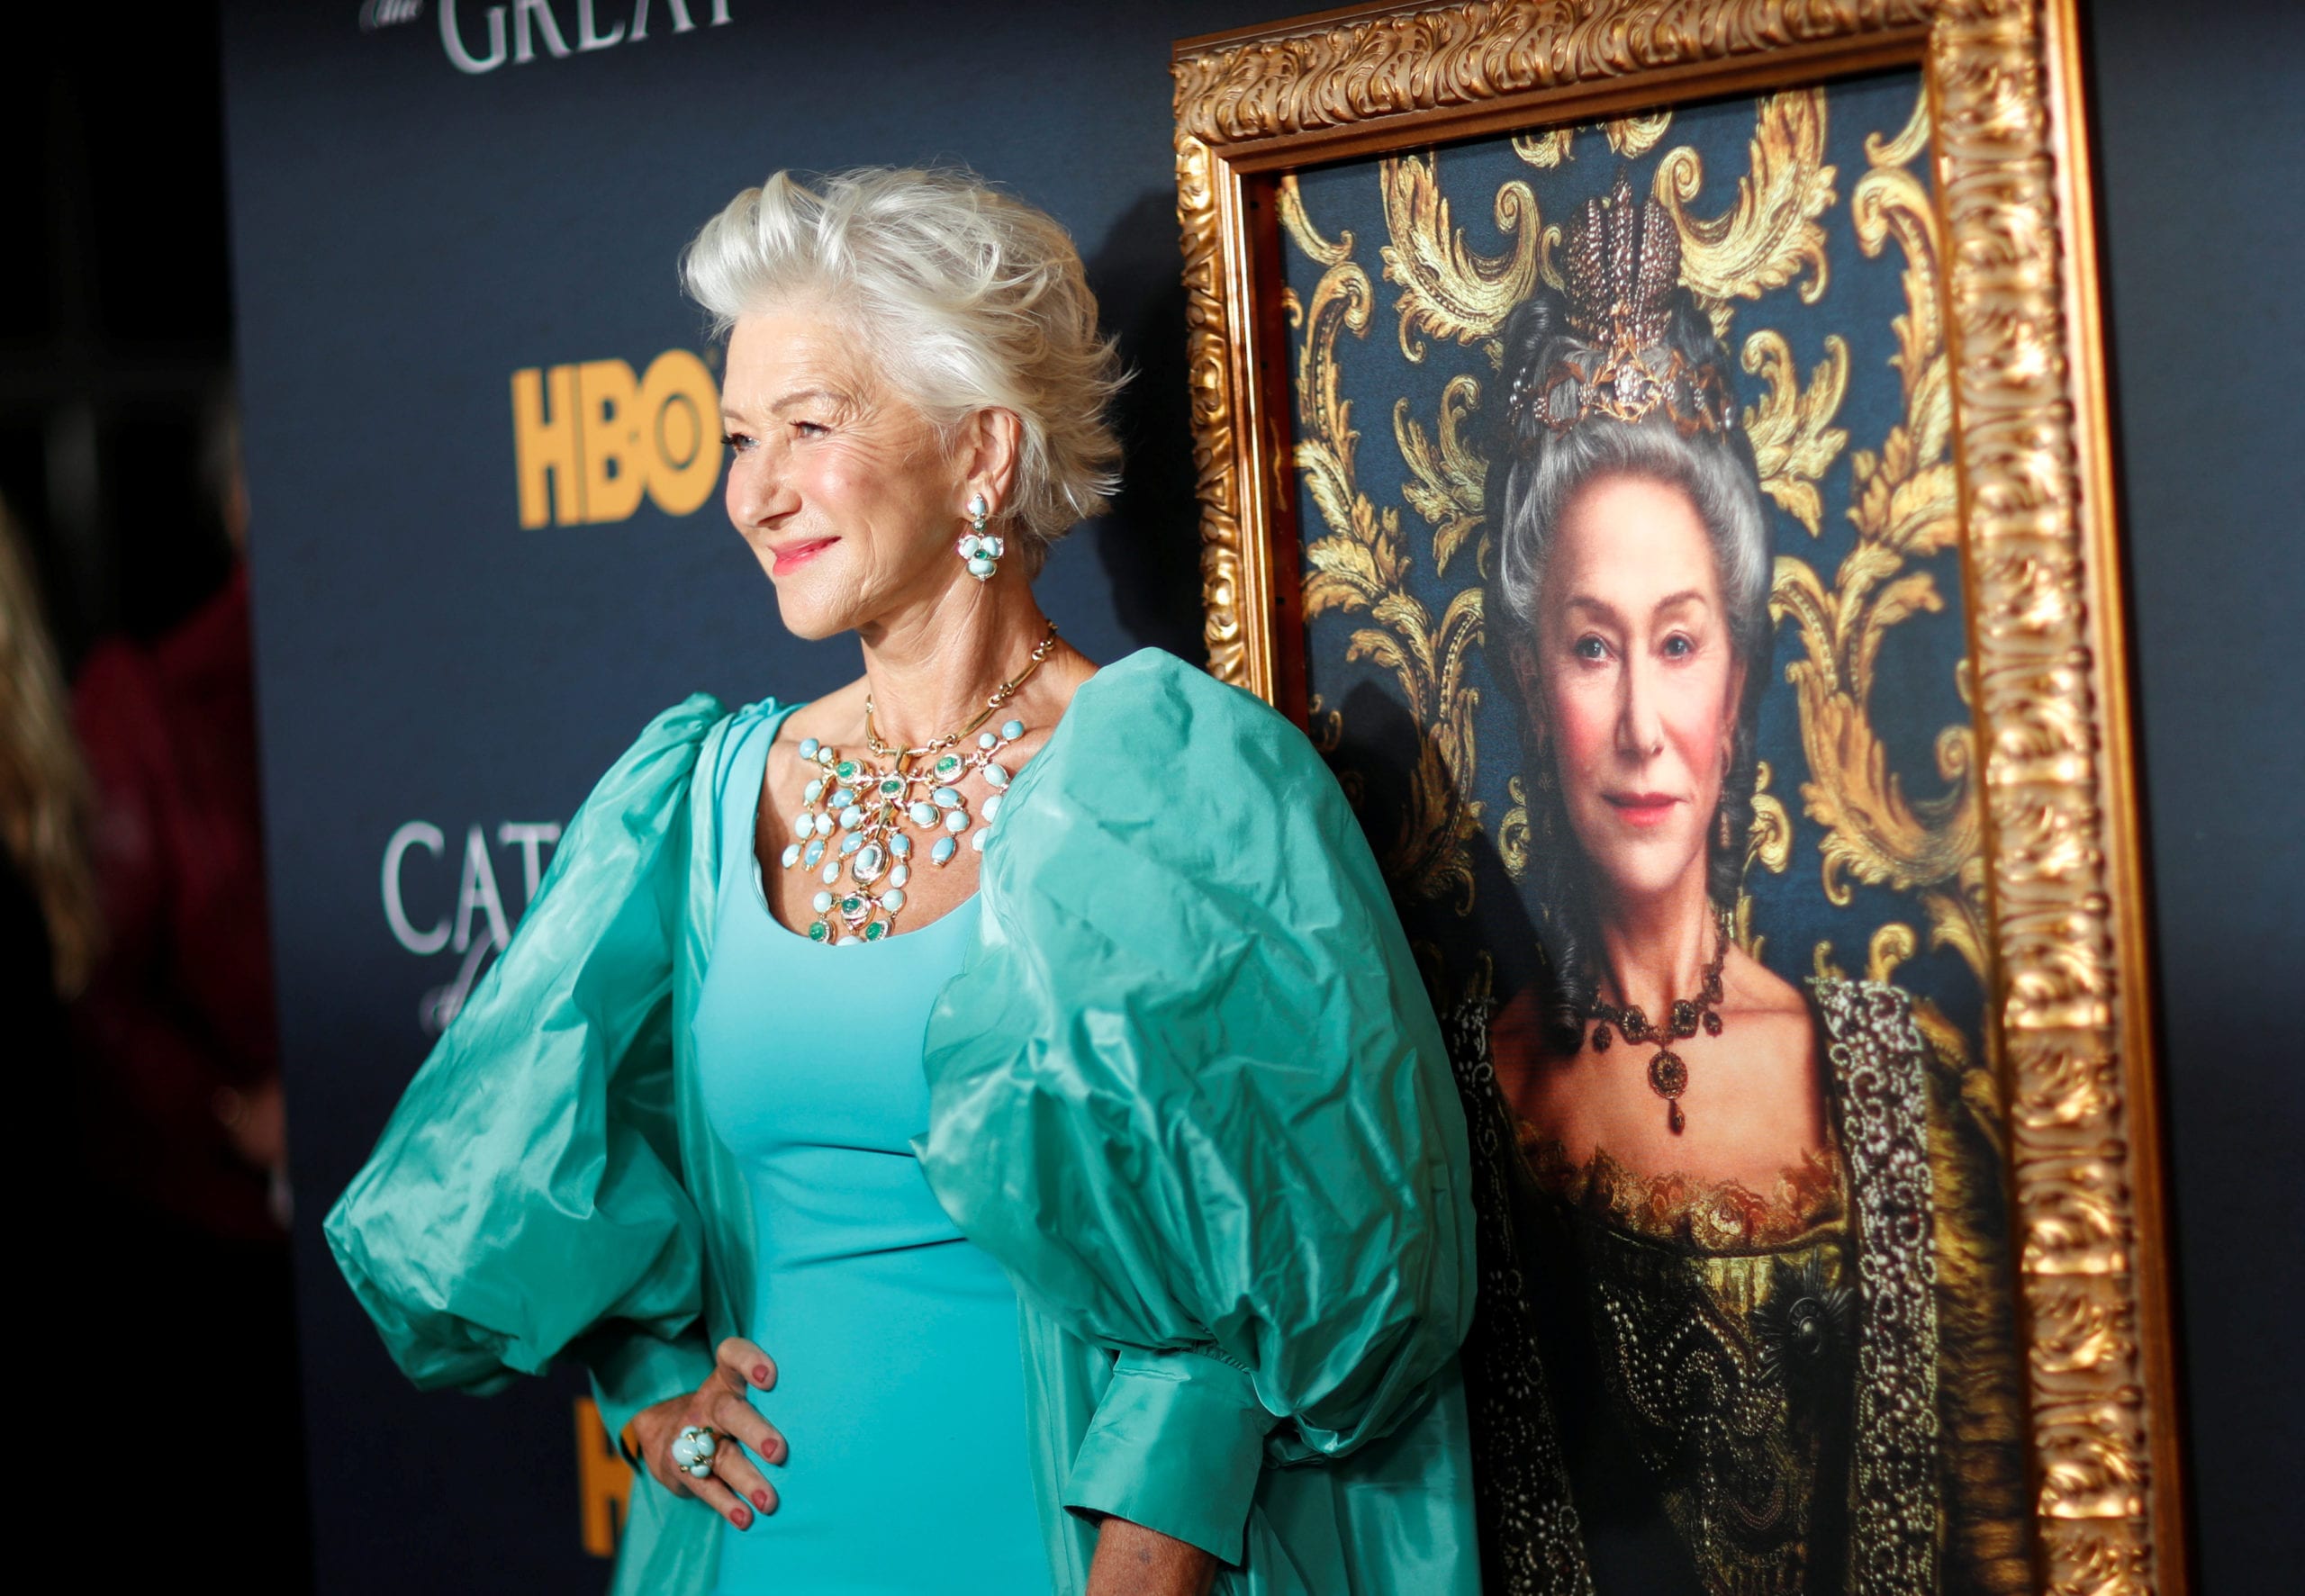 Helen Mirren attends a premiere for the HBO miniseries Catherine the Great at the Hammer Museum in Los Angeles, California, U.S., October 17, 2019. REUTERS/Mario Anzuoni